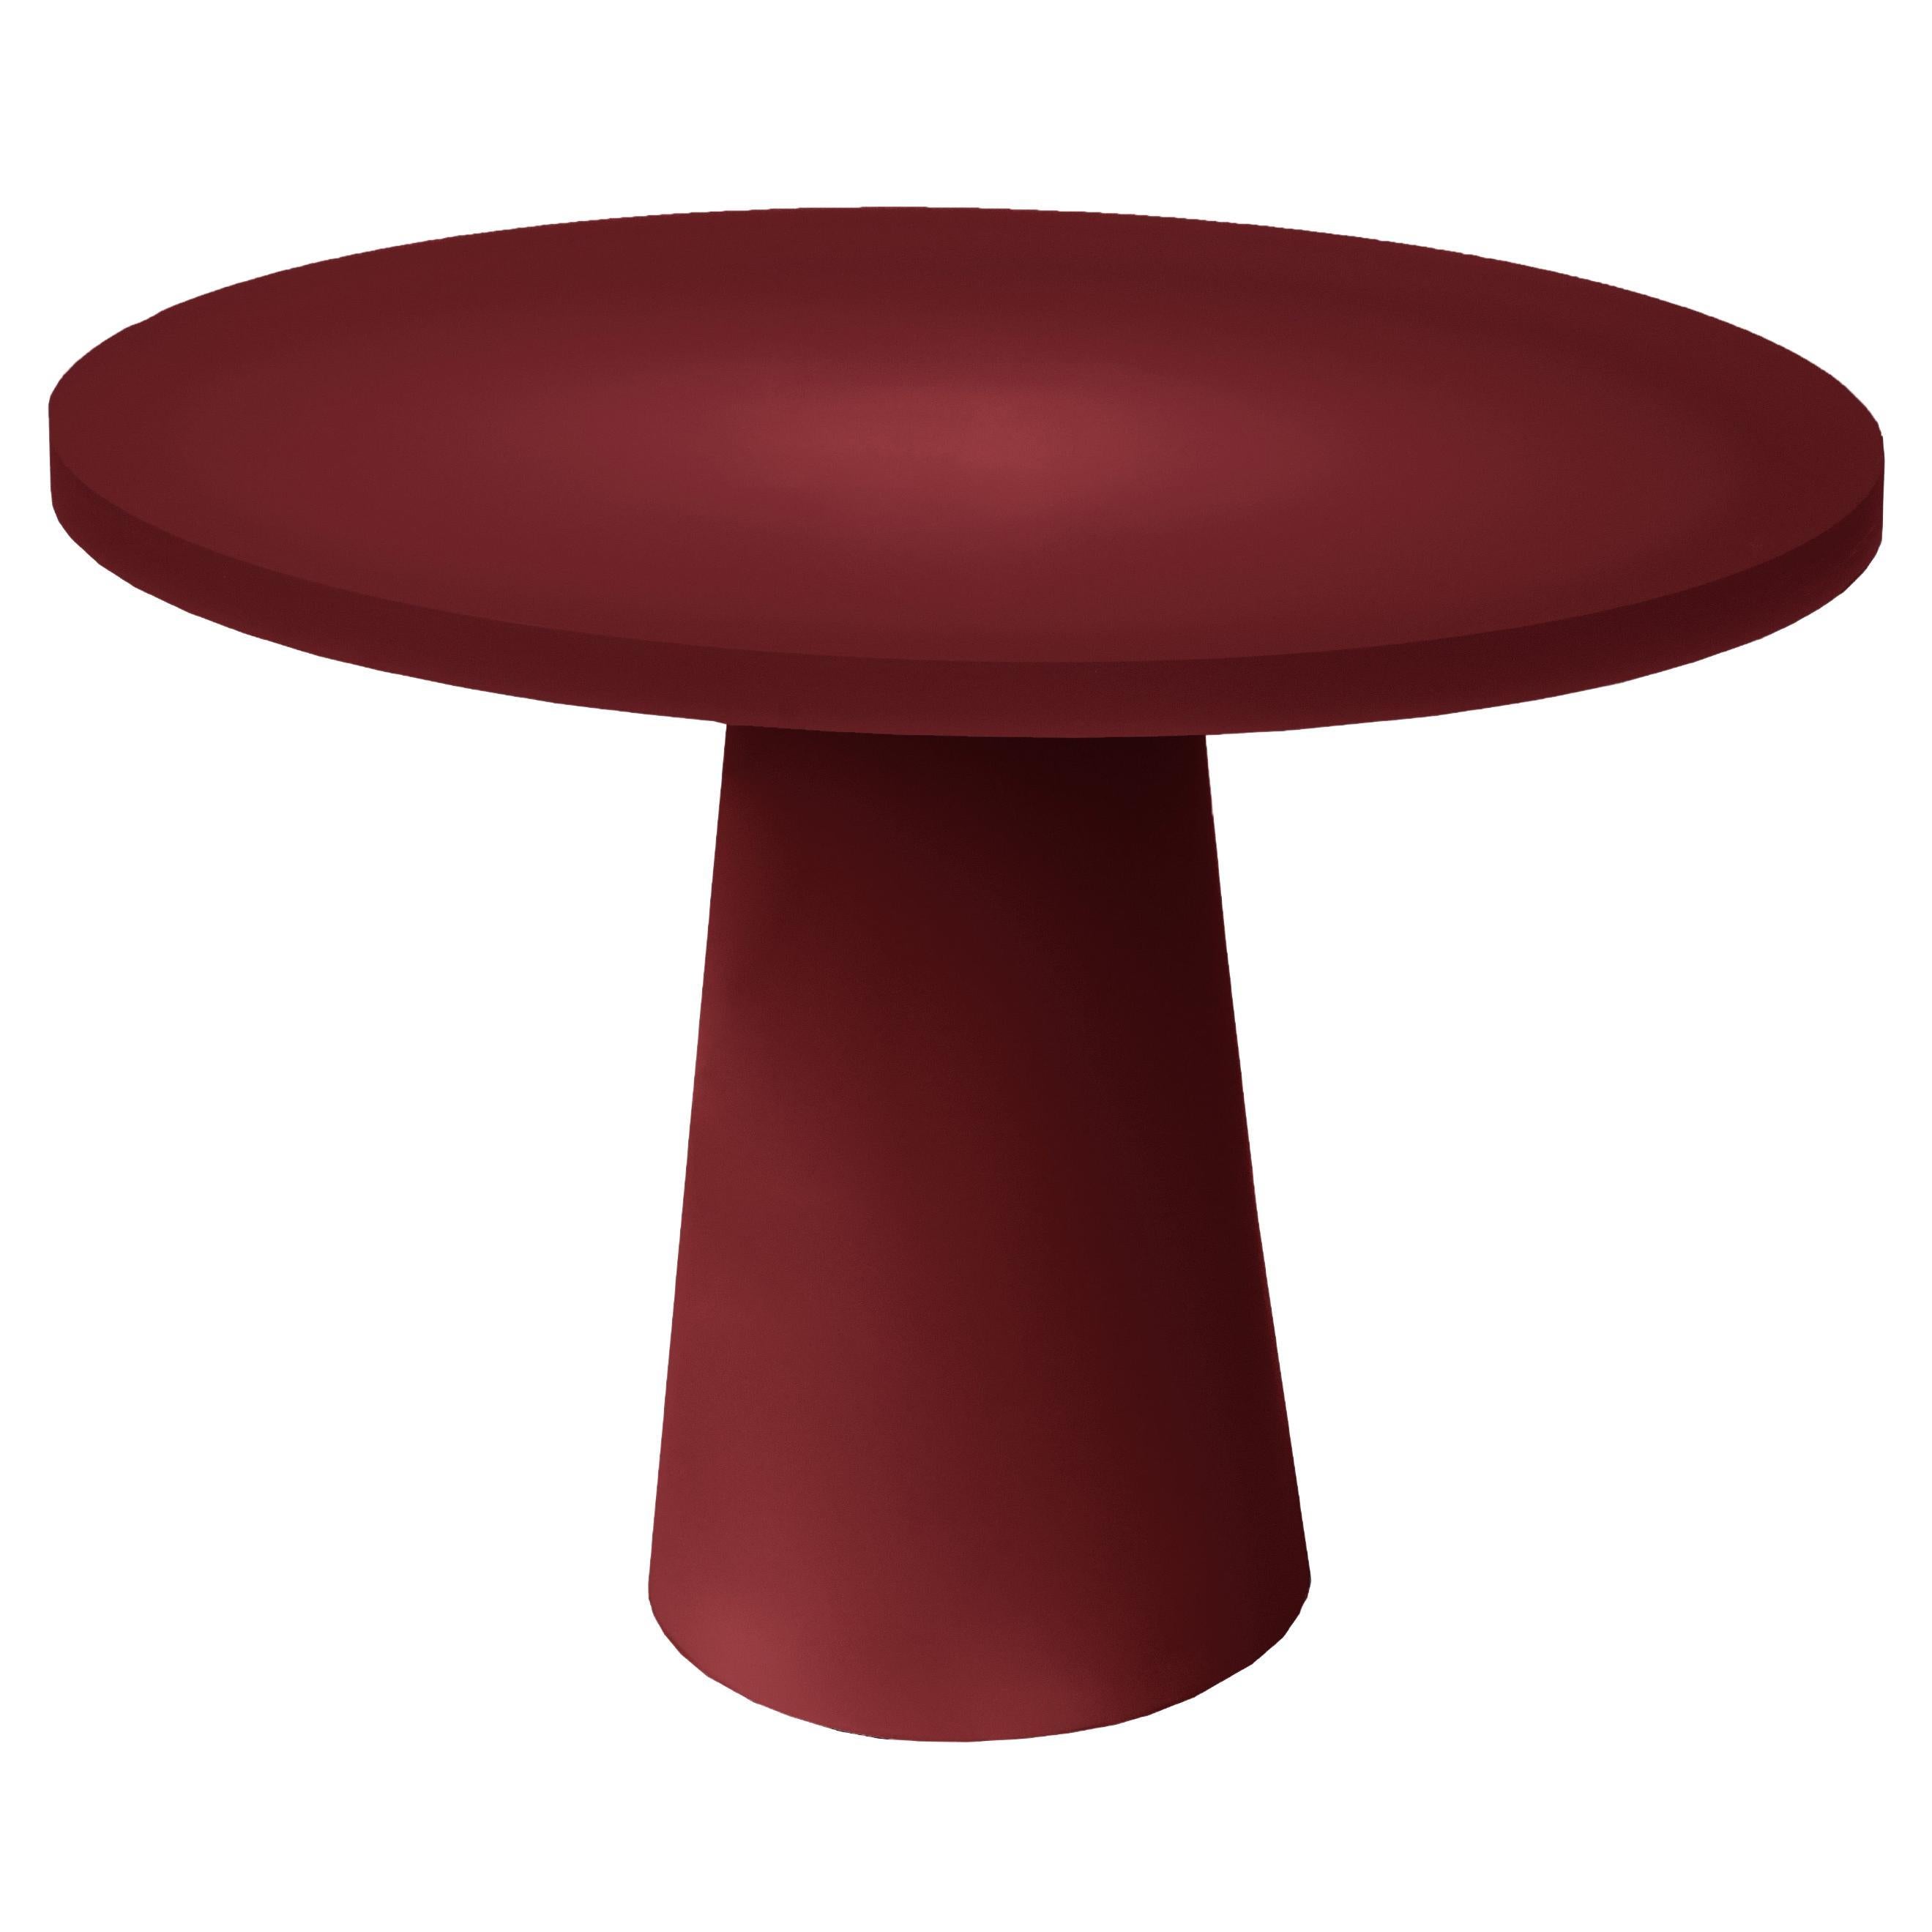 Elliptical Entry Resin Table In Burgundy by Facture, REP by Tuleste Factory For Sale